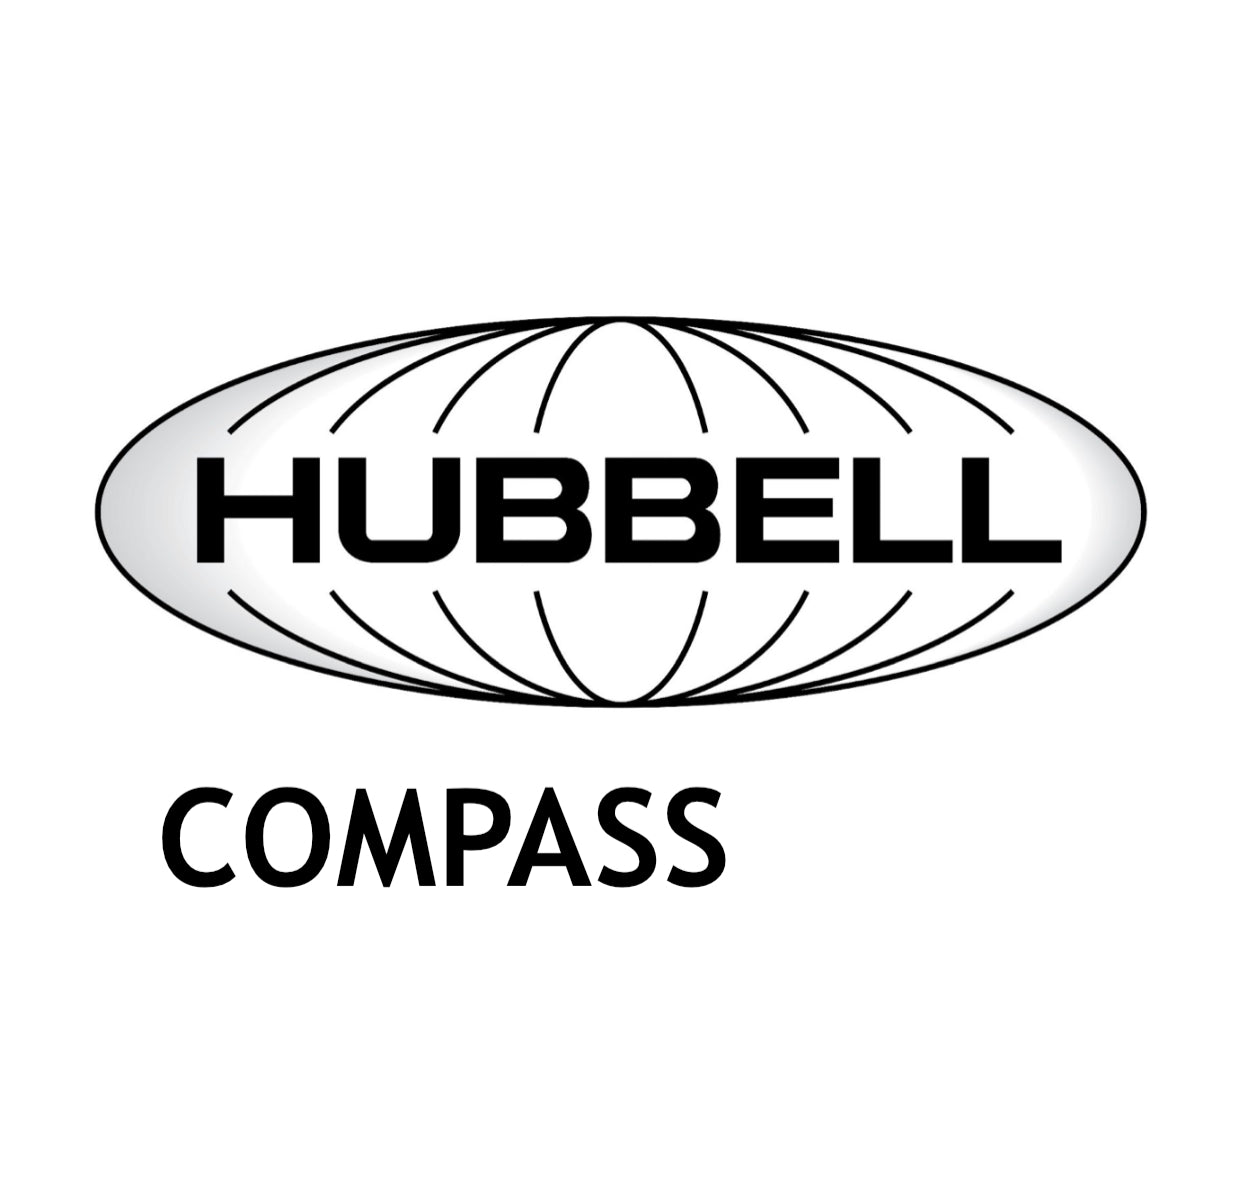 HUBBELL COMPASS